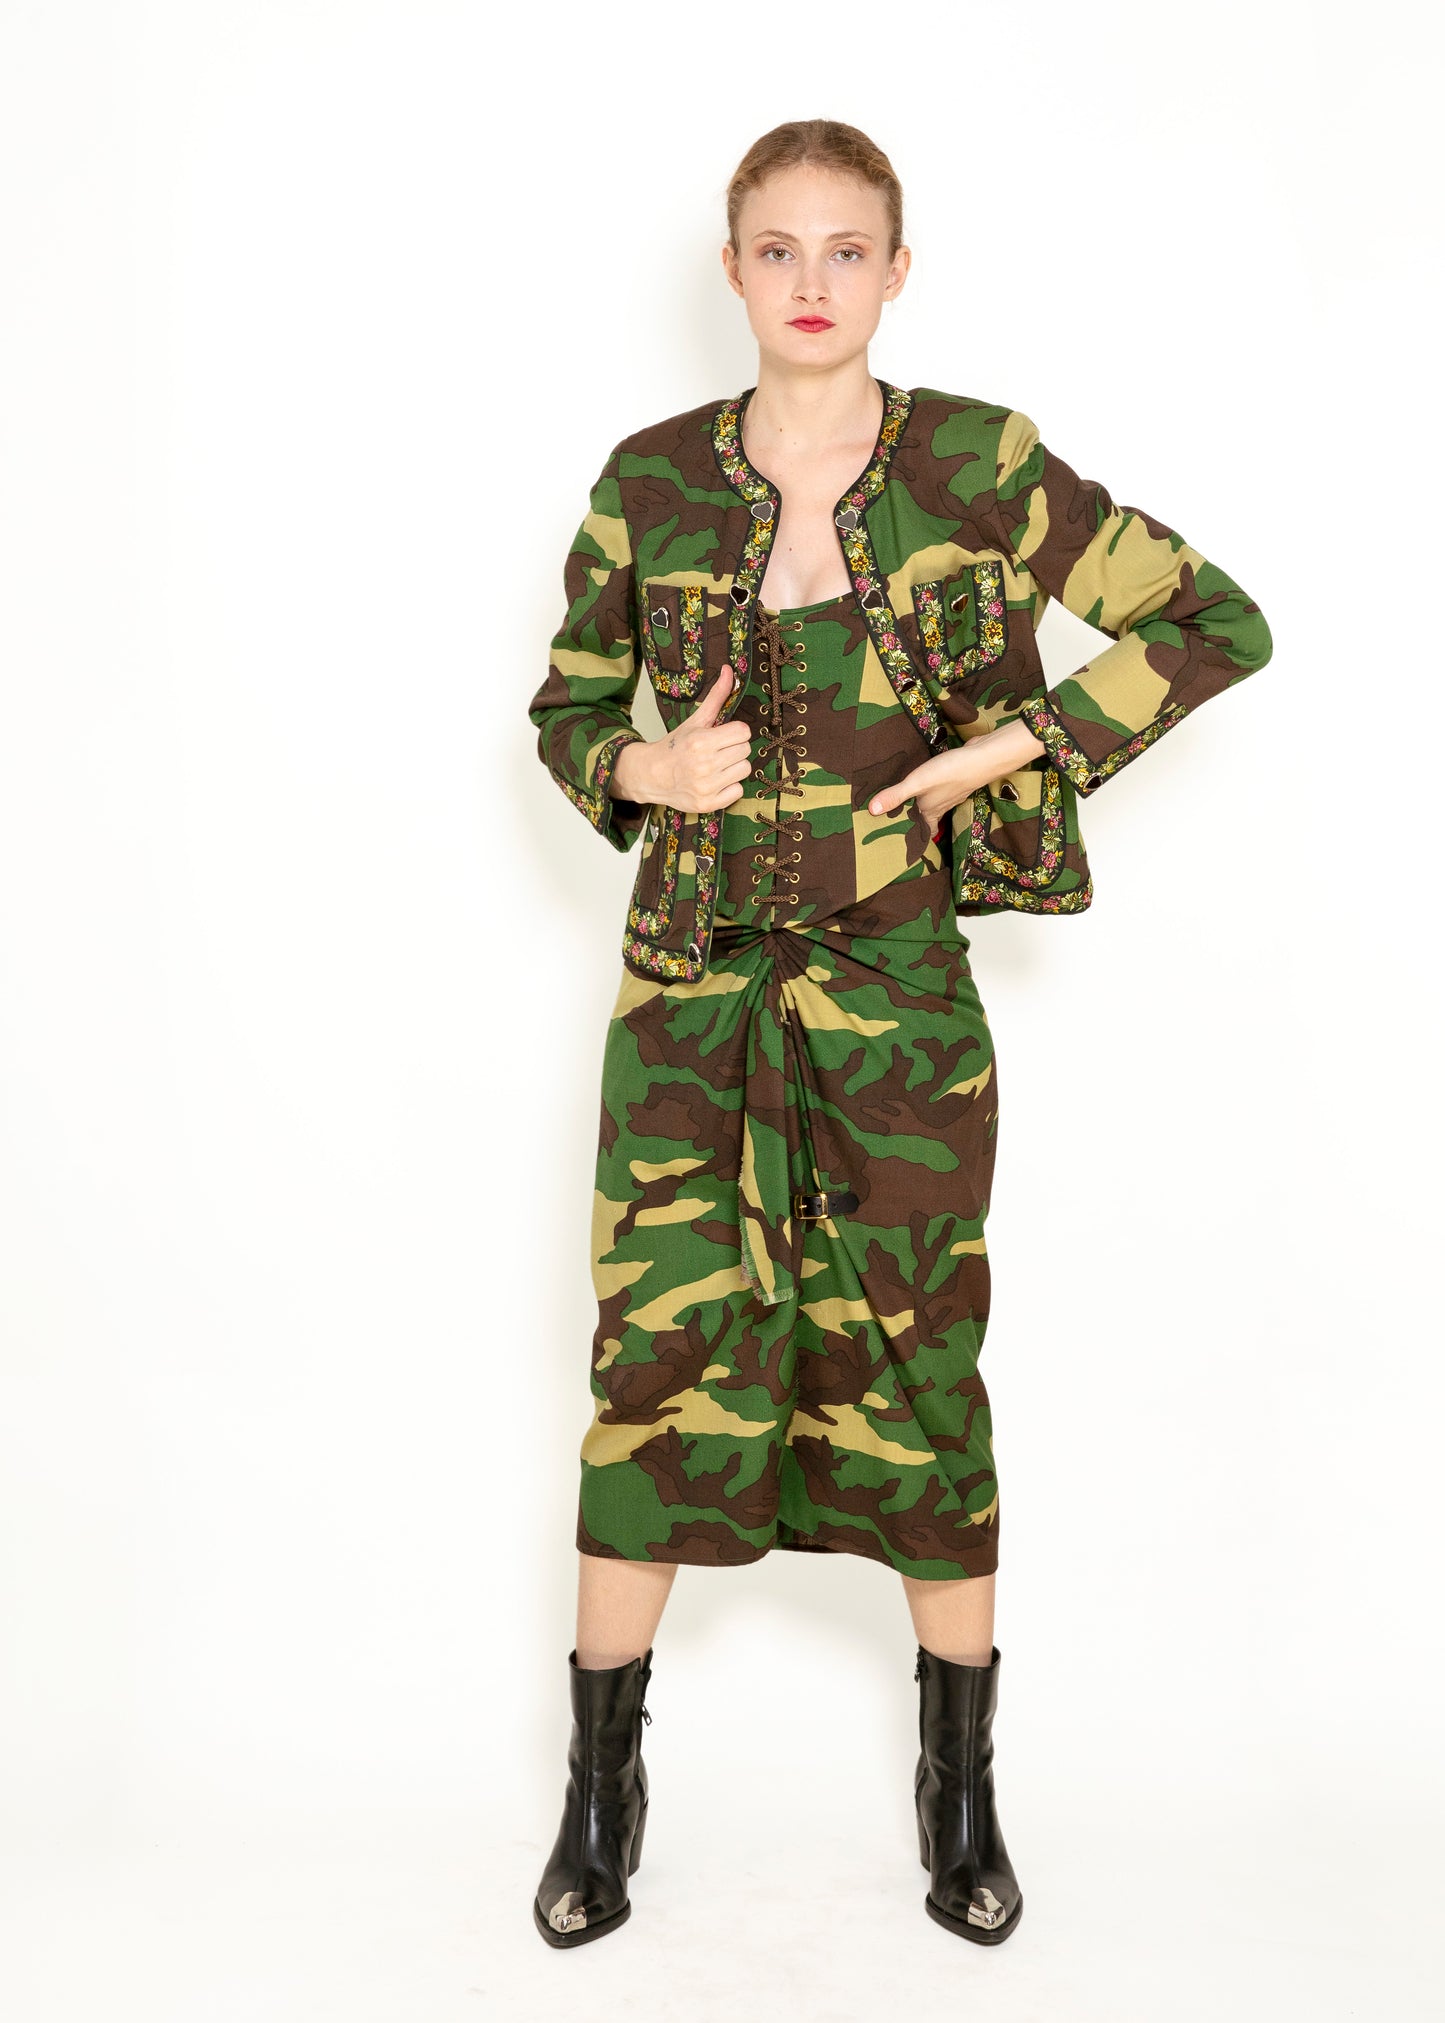 Moschino Couture Camouflage 3 Pc Skirt, Jacket, & Corset Set